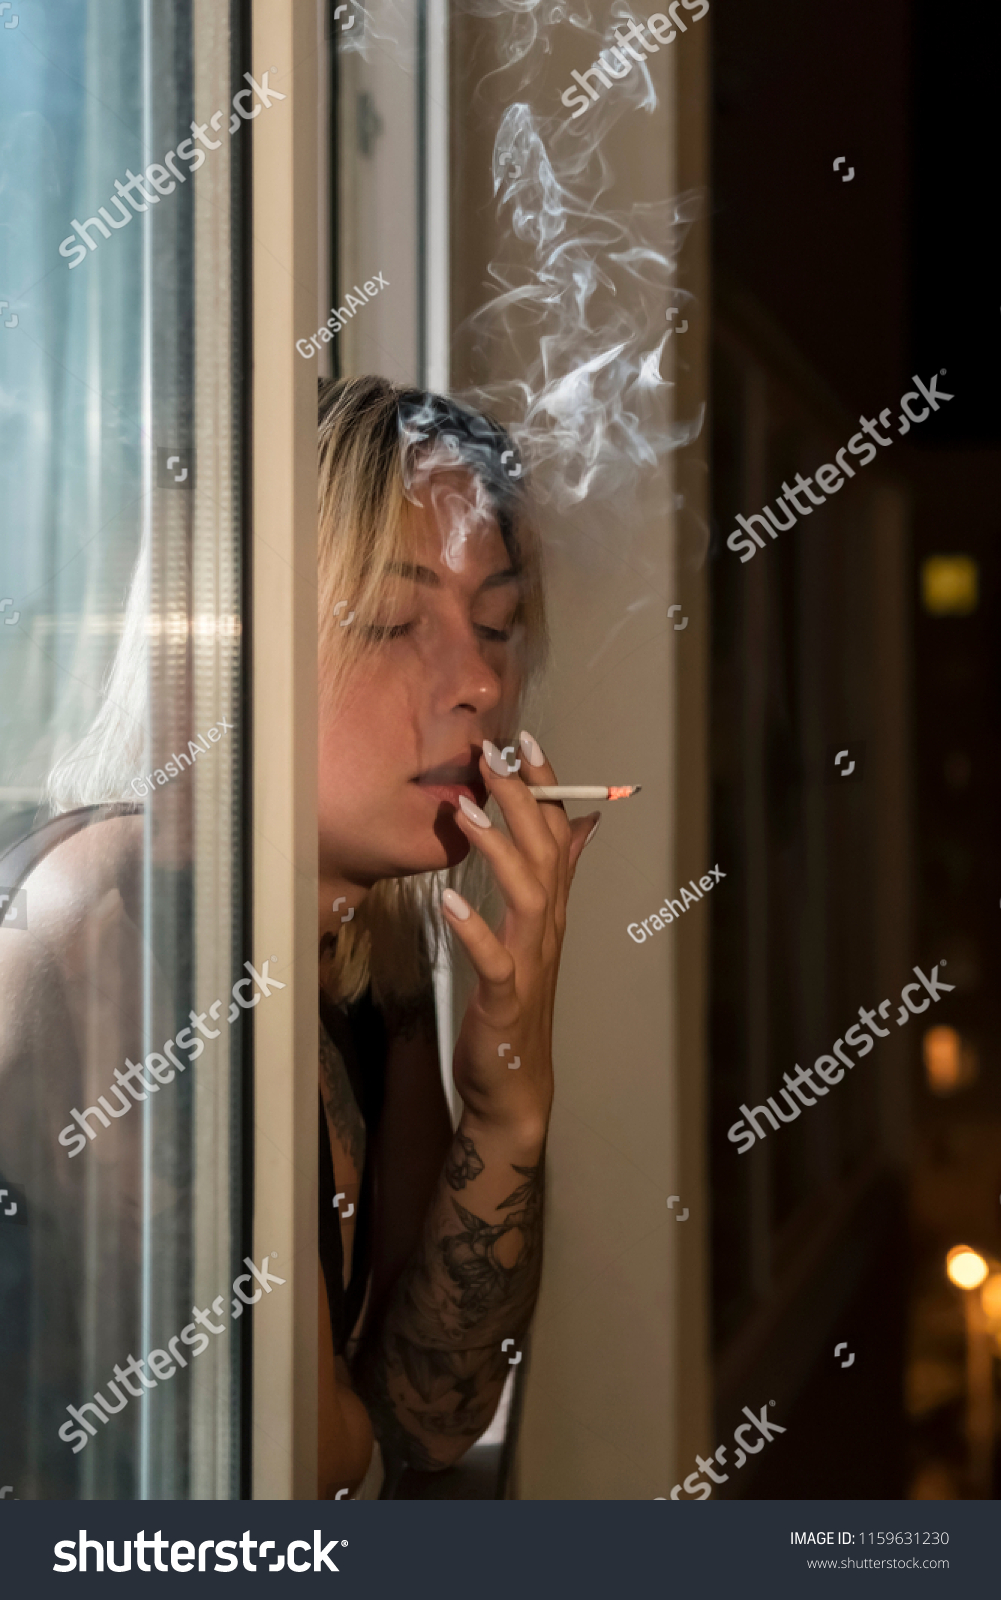 Smoking out the window